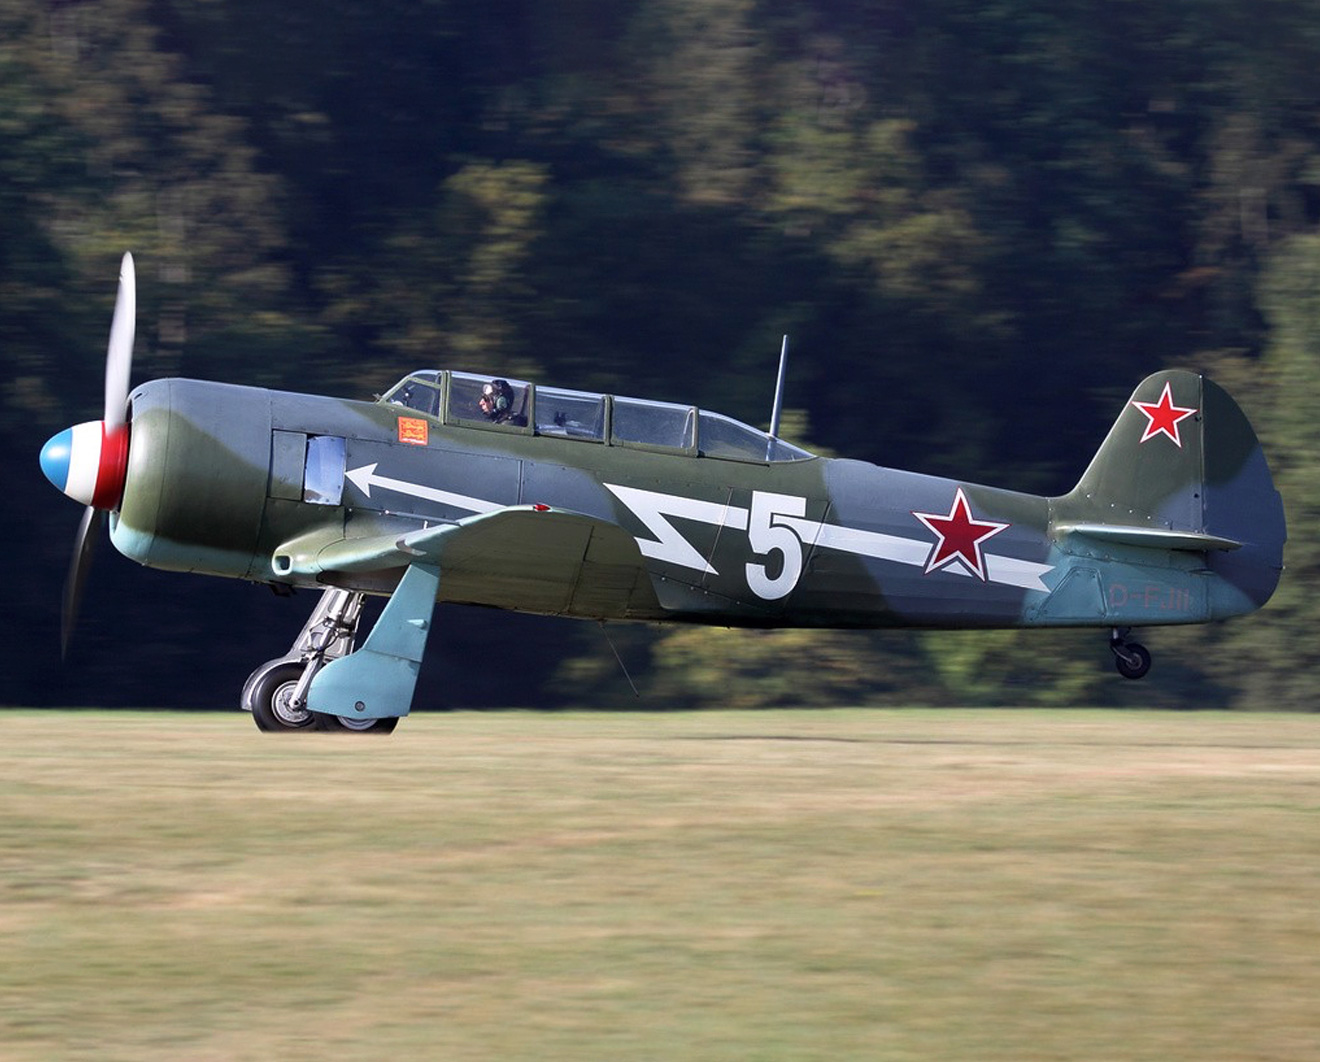 The History that inspired the H-King Yak-11 1450mm Commemorative Warbird and Red Reno Racer</strong